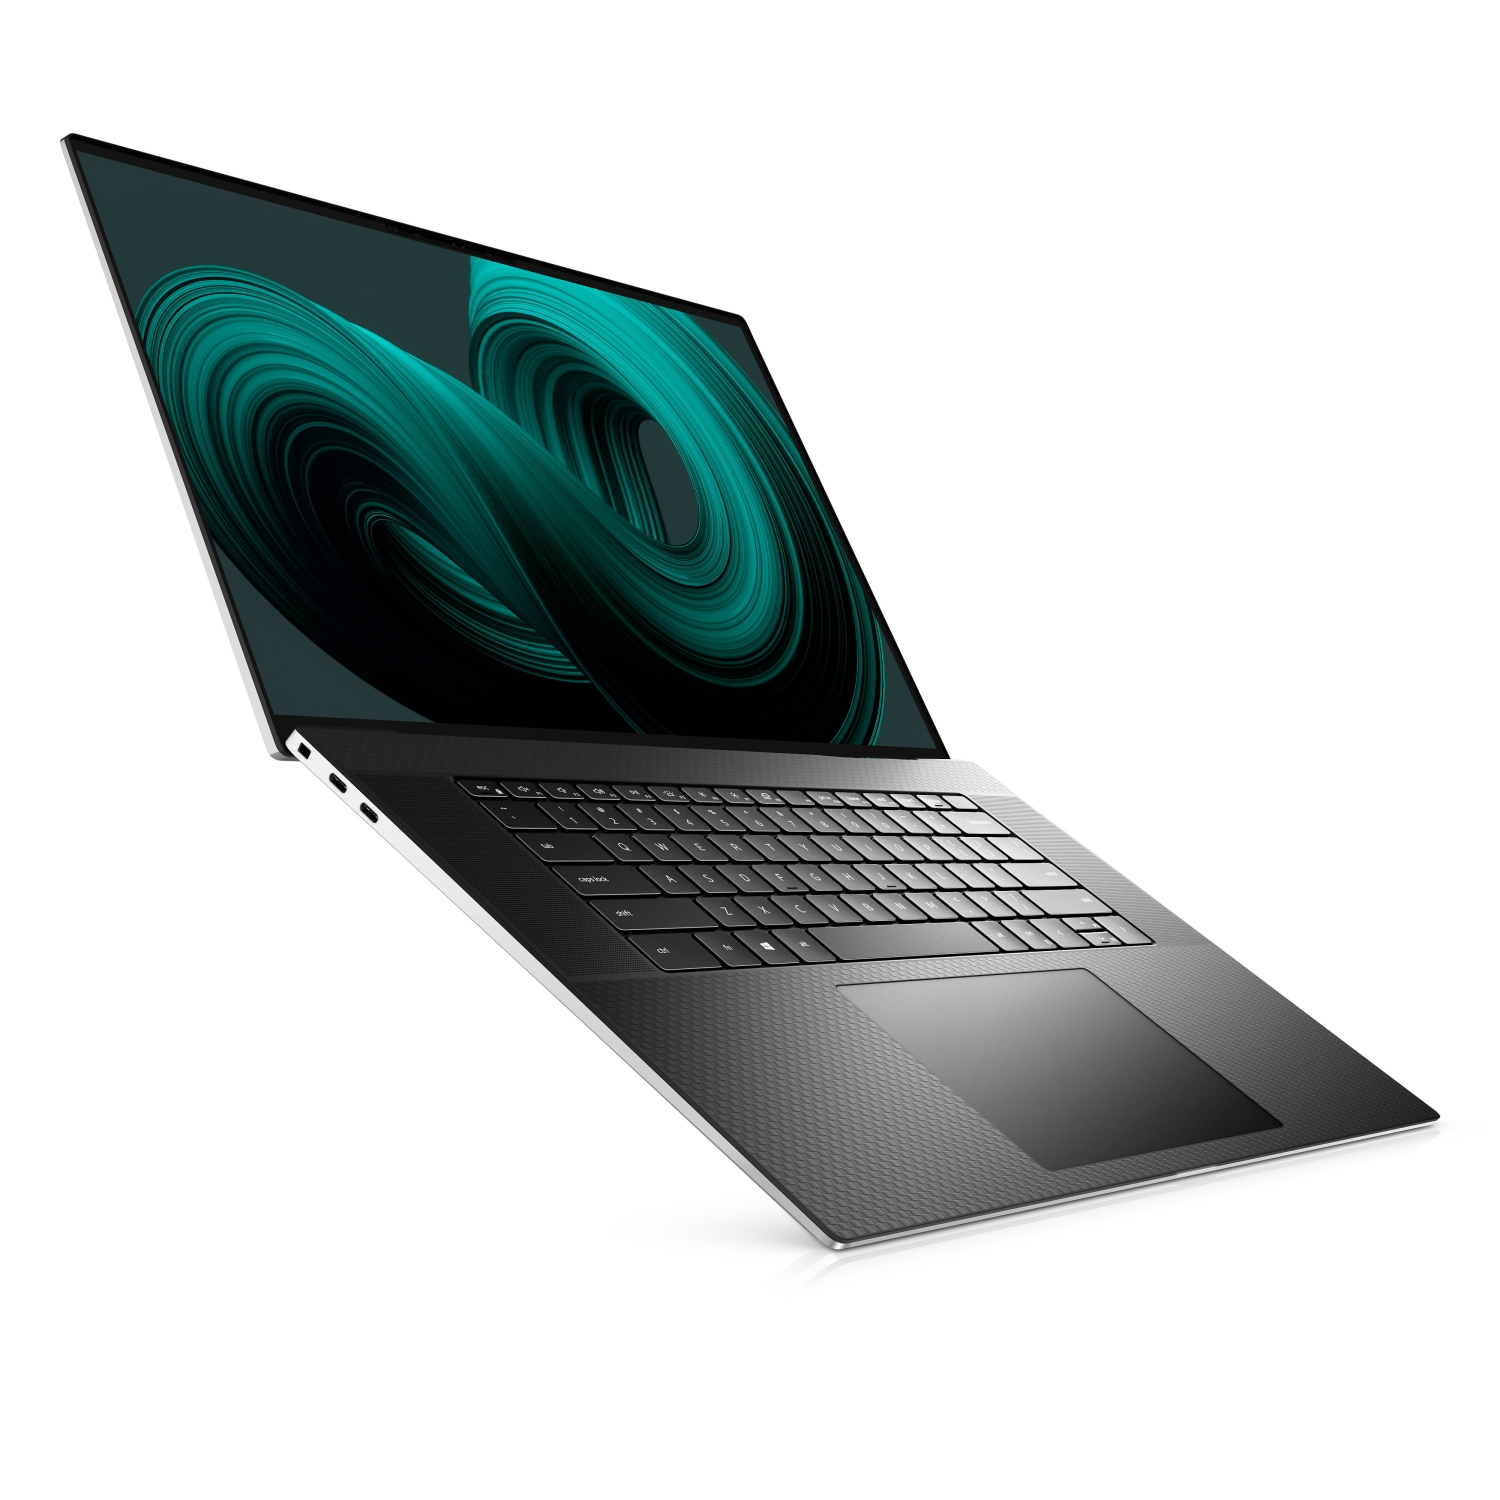 Refurbished (Excellent) - Dell XPS 17 9710 Laptop (2021) | 17" 4K Touch | Core i9 - 1TB SSD - 32GB RAM - RTX 3060 | 8 Cores @ 4.9 GHz - 11th Gen CPU Certified Refurbished